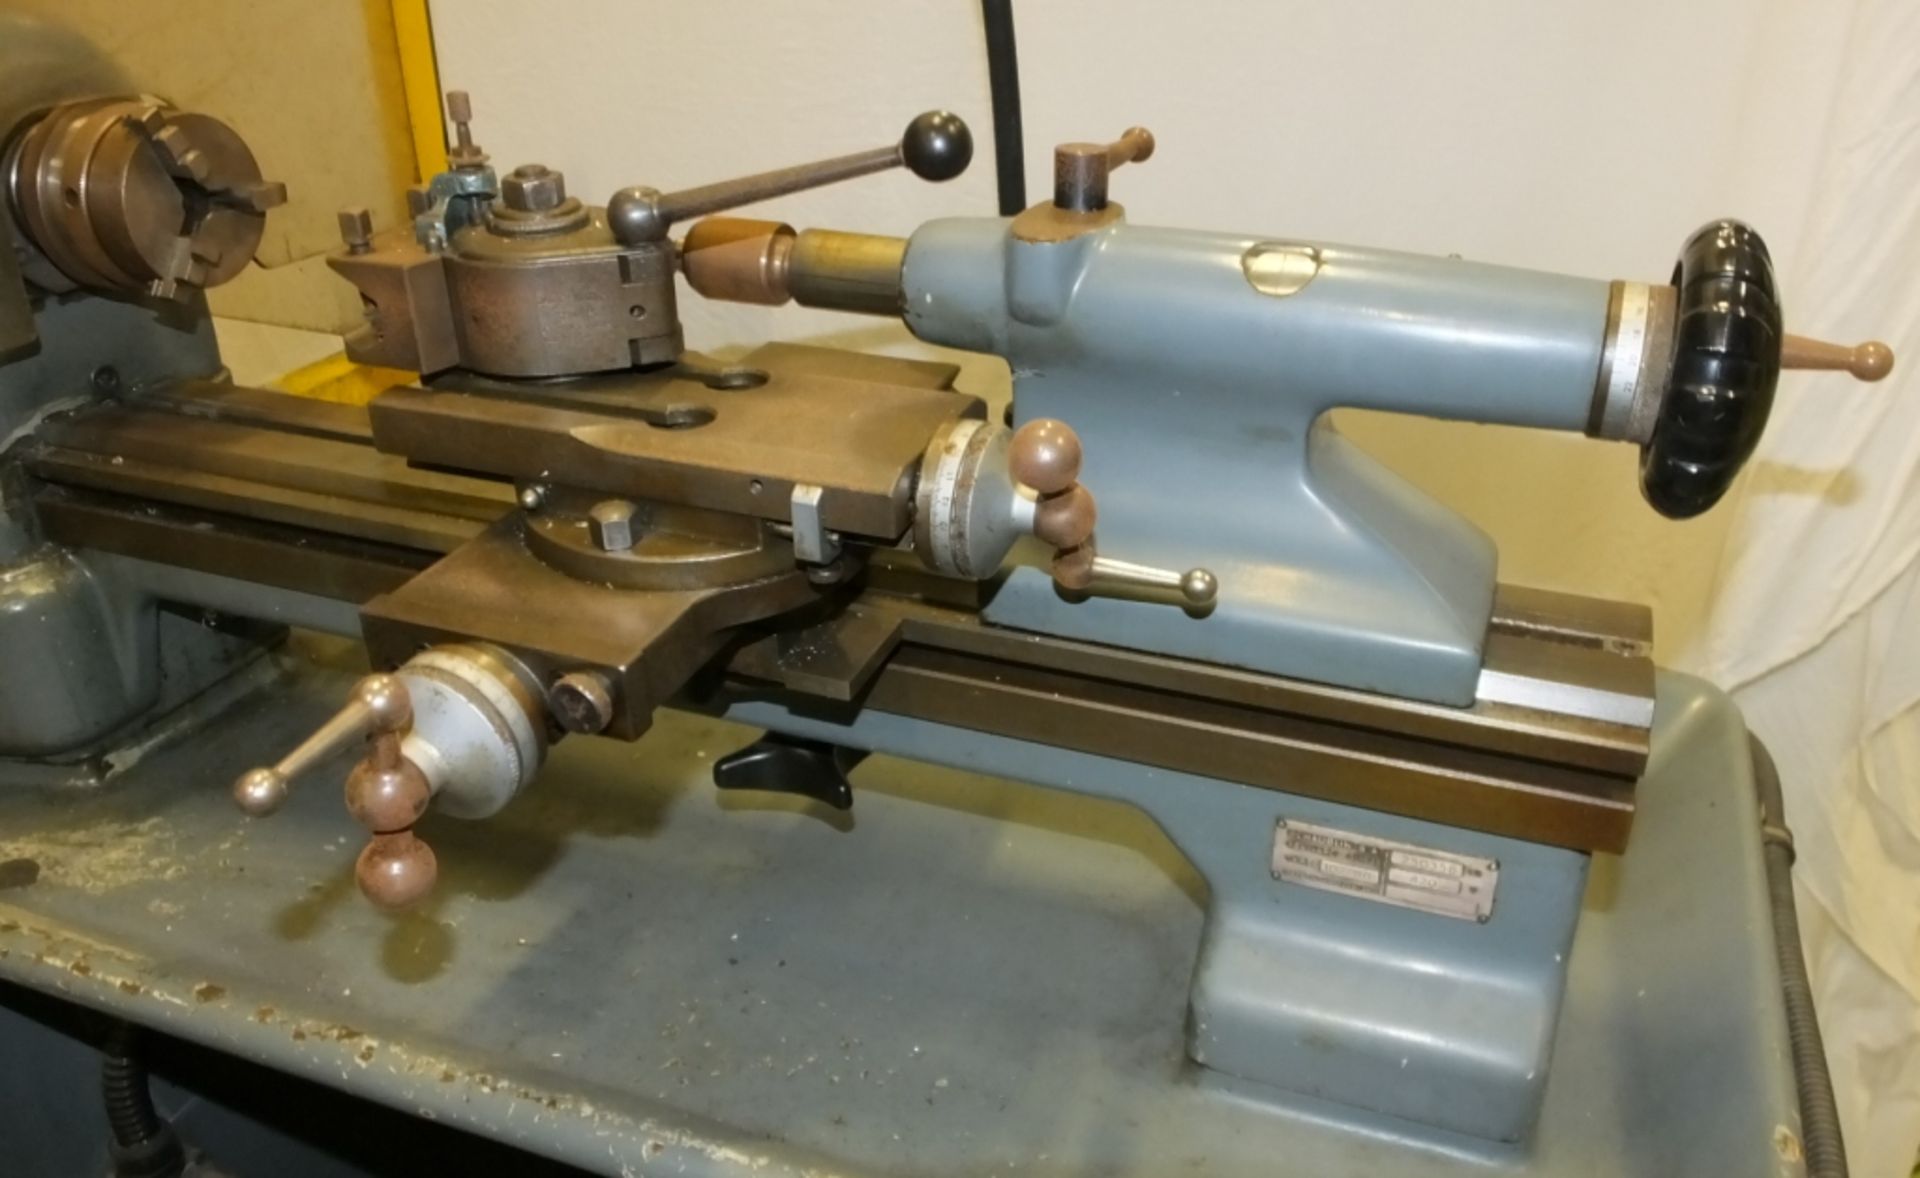 Schaublin S.A. Lathe Type 102-80 - 420V - Serial 250358 - £10 Loading Charge Applied to th - Image 2 of 15